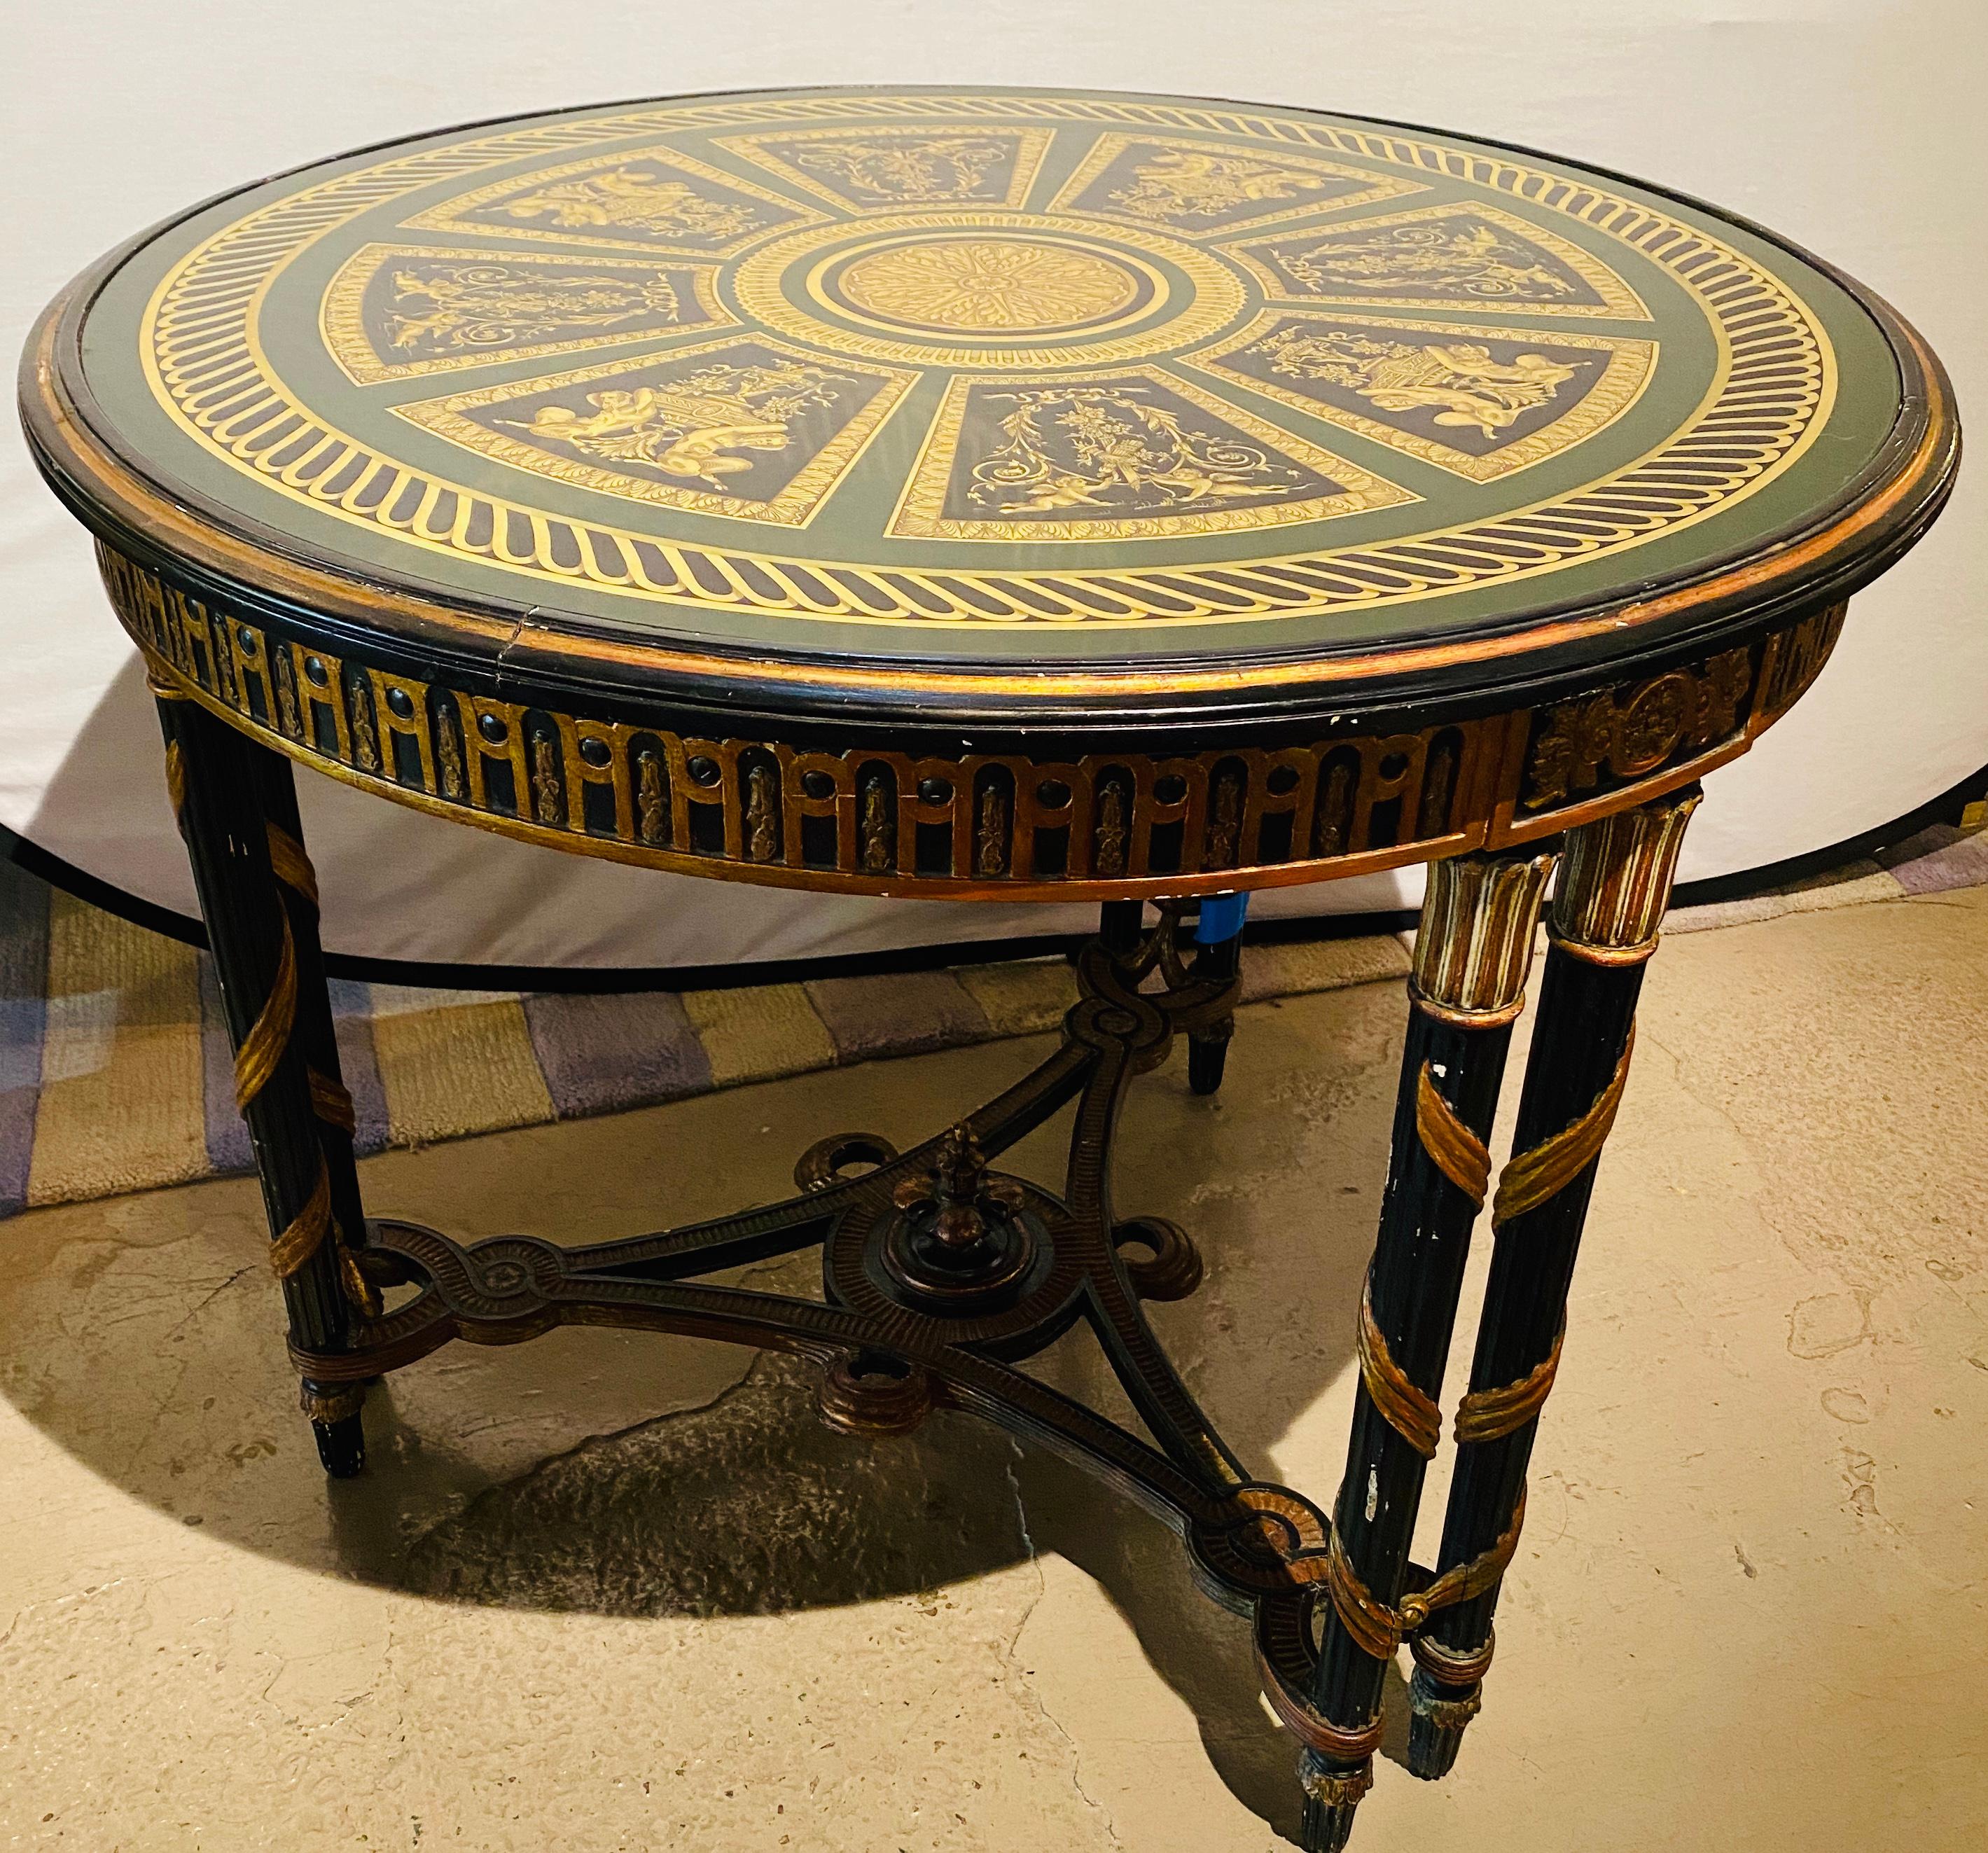 French neoclassical style center table with églomisé glass top of Architectural design. This one of a kind center, end or dining table leaves no stone unturned in the world of decorative design. The ebony and gilt gold decorated églomisé tabletop